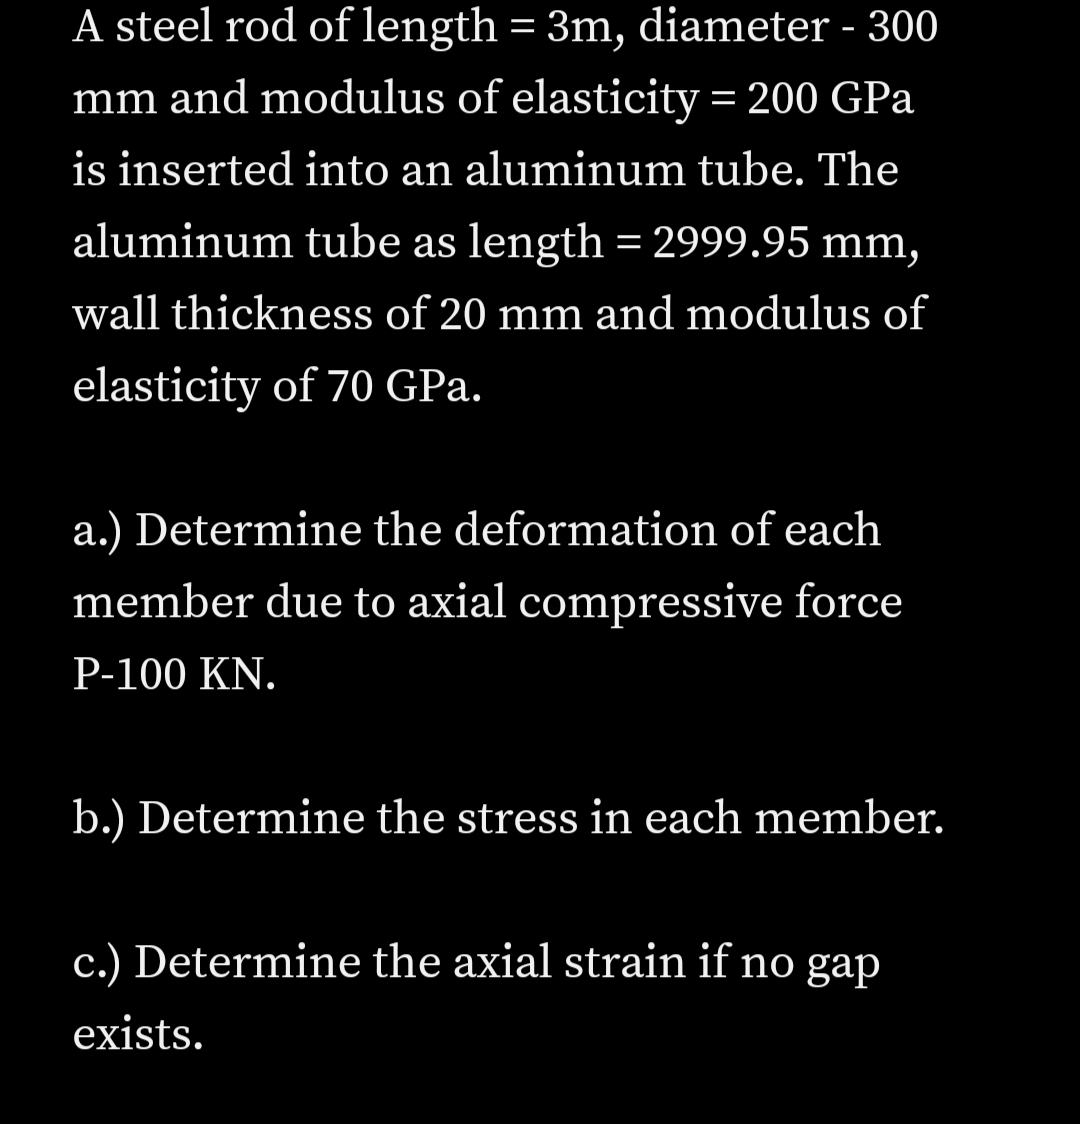 A steel rod of length = 3m, diameter - 300
mm and modulus of elasticity = 200 GPa
is inserted into an aluminum tube. The
aluminum tube as length = 2999.95 mm,
wall thickness of 20 mm and modulus of
elasticity of 70 GPa.
a.) Determine the deformation of each
member due to axial compressive force
P-100 KN.
b.) Determine the stress in each member.
c.) Determine the axial strain if no gap
exists.
